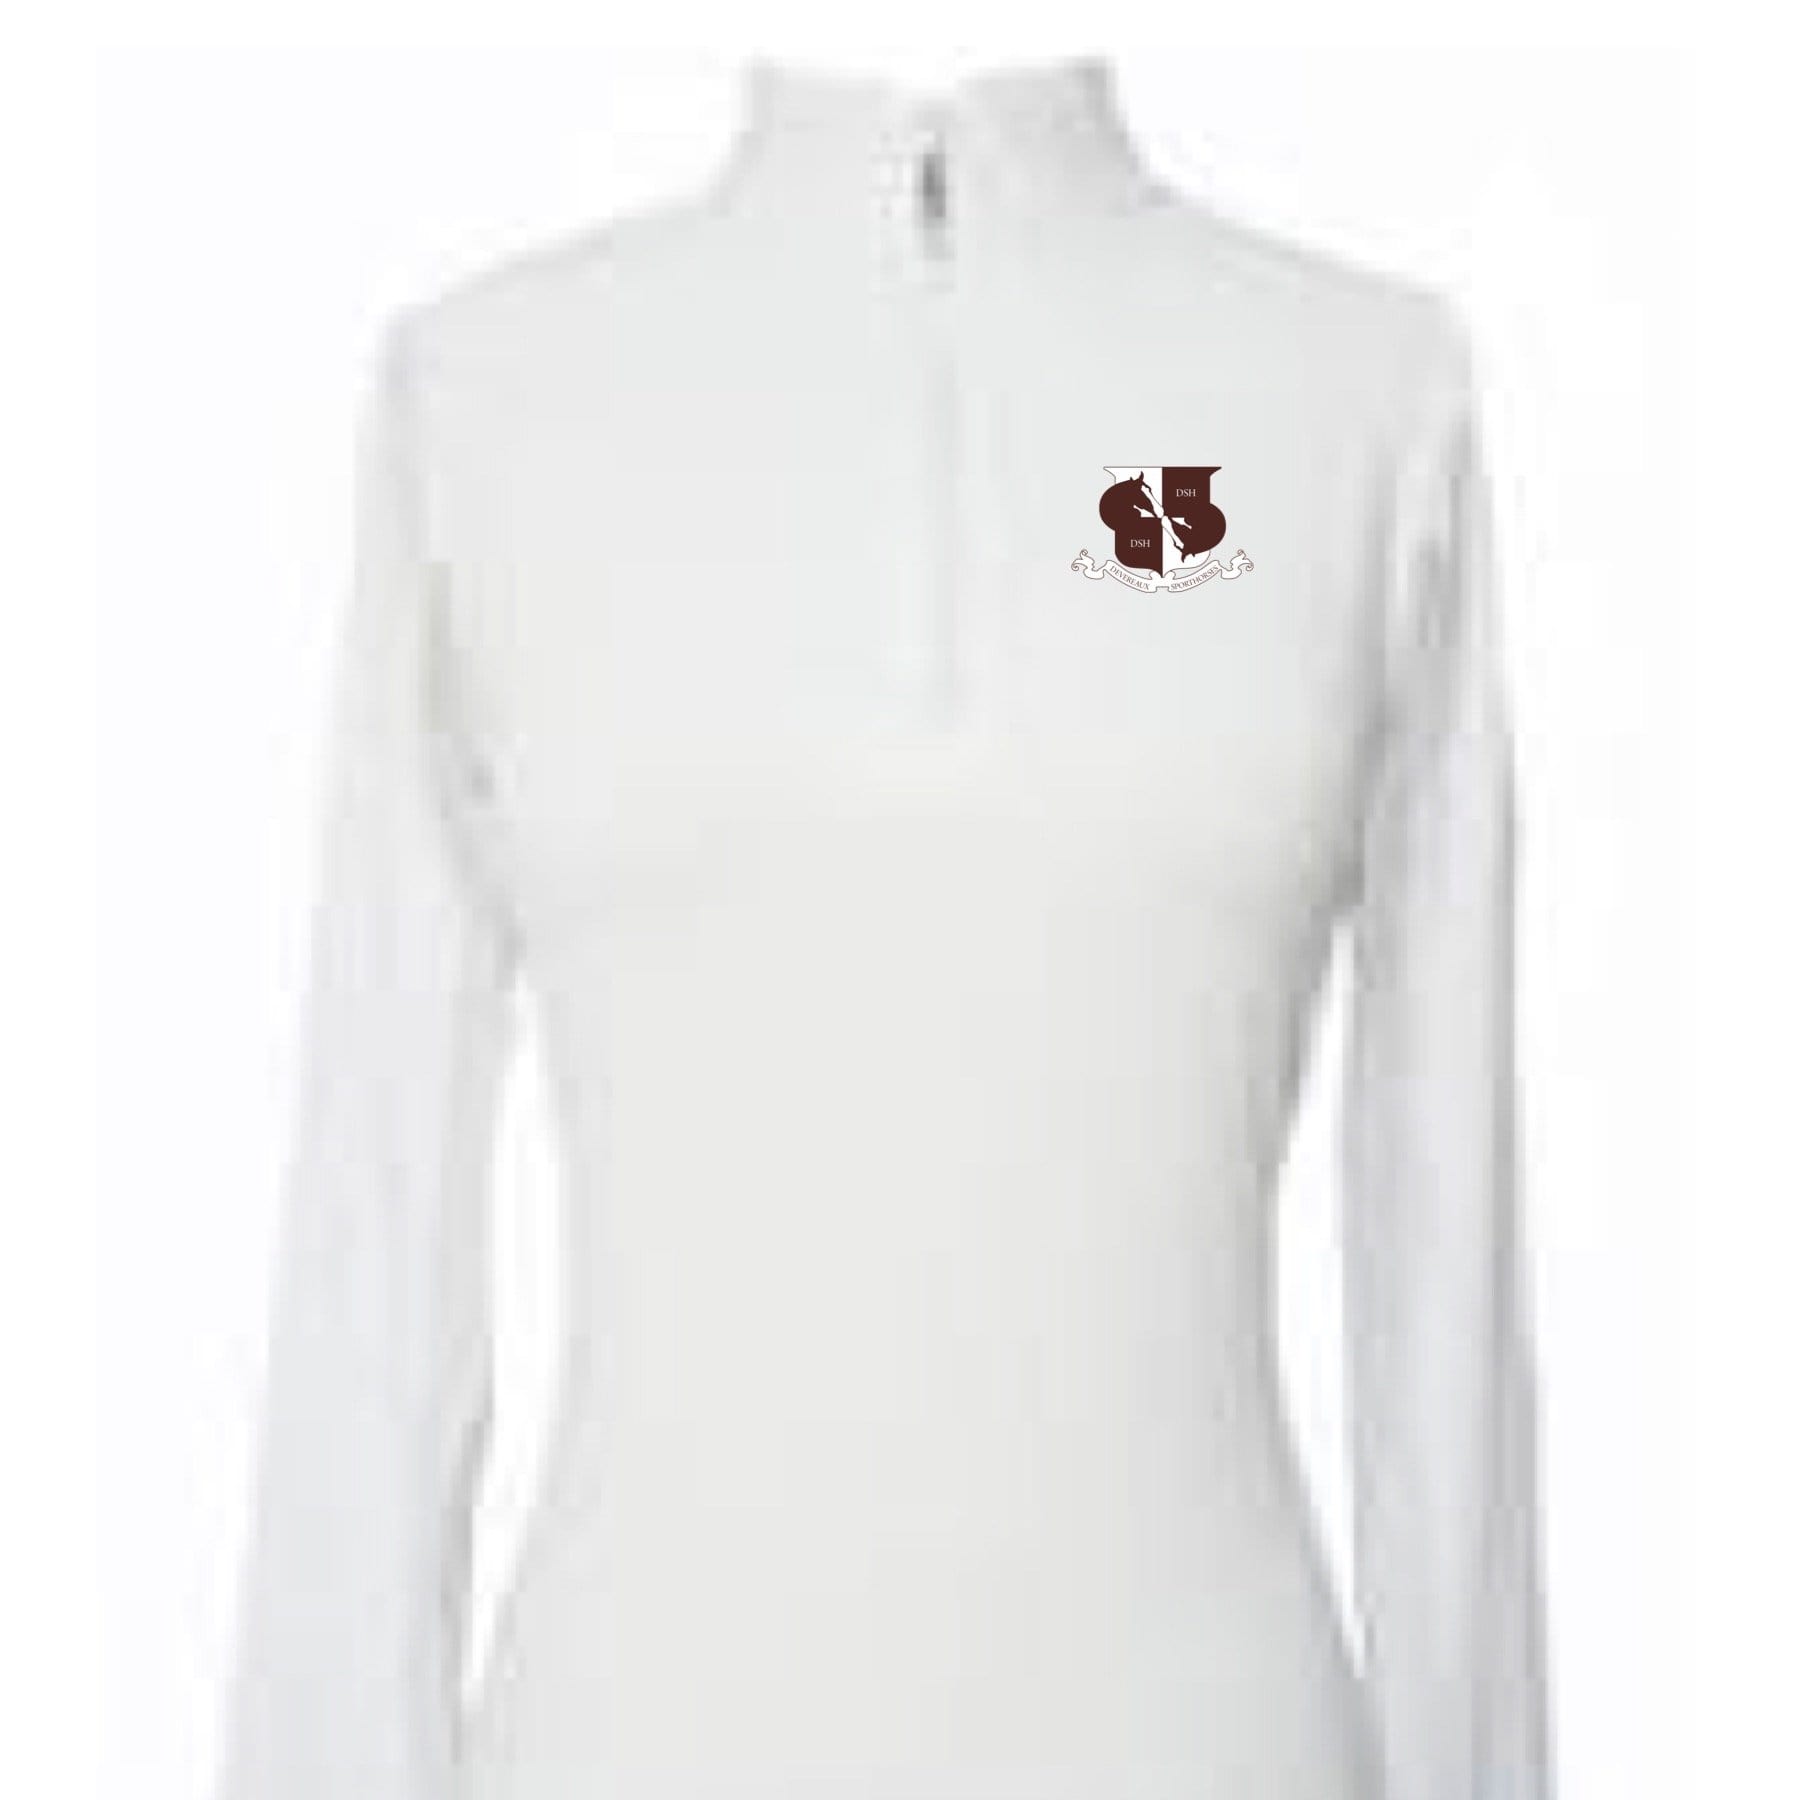 Equestrian Team Apparel Custom Team Shirts DEVEREAUX EIS Sun Shirt white equestrian team apparel online tack store mobile tack store custom farm apparel custom show stable clothing equestrian lifestyle horse show clothing riding clothes horses equestrian tack store